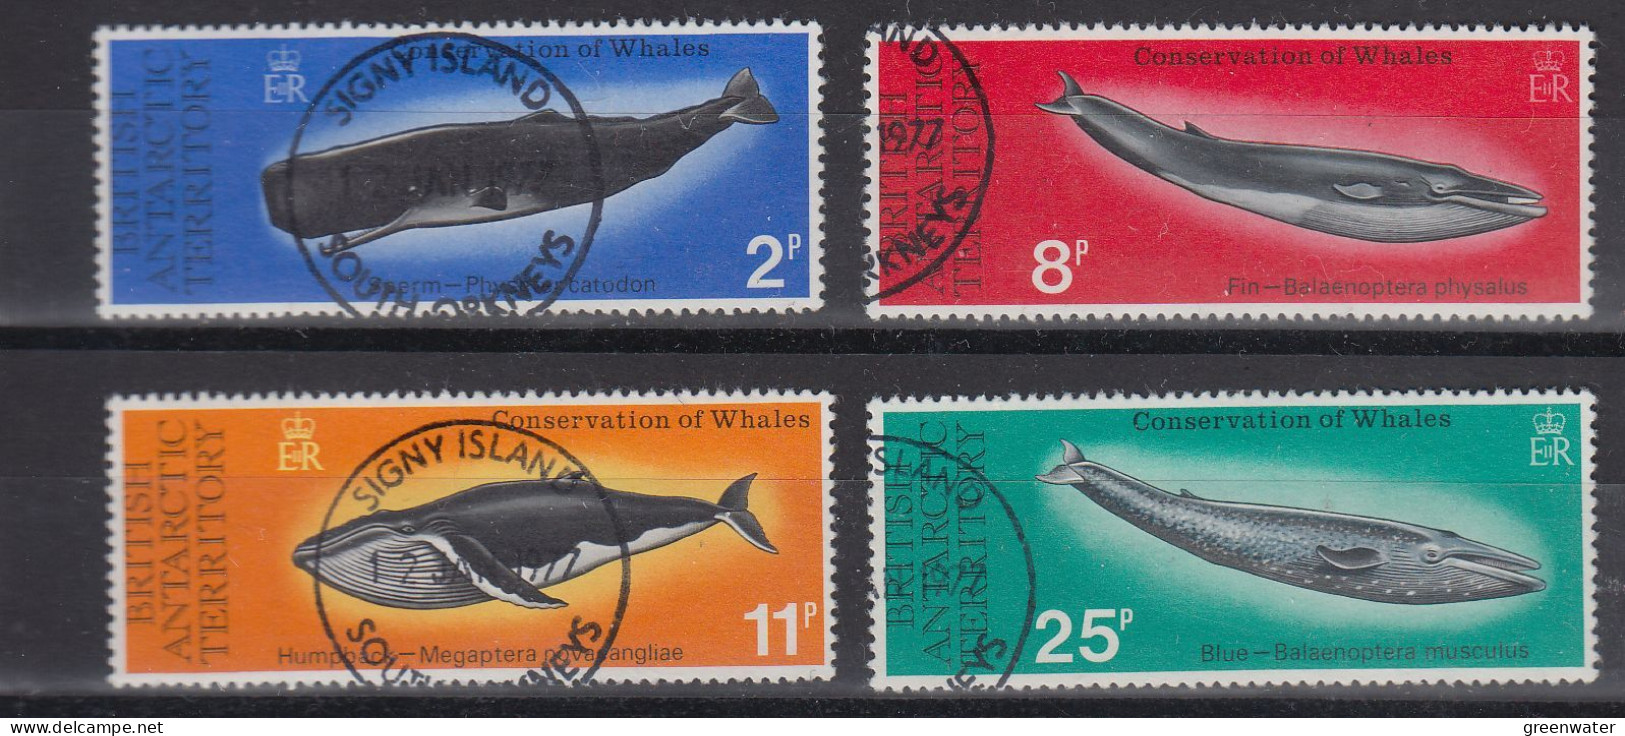 British Antarctic Territorry (BAT) 1977 Whale Conservation 4v Used "Signy Island"  (58711) - Usados